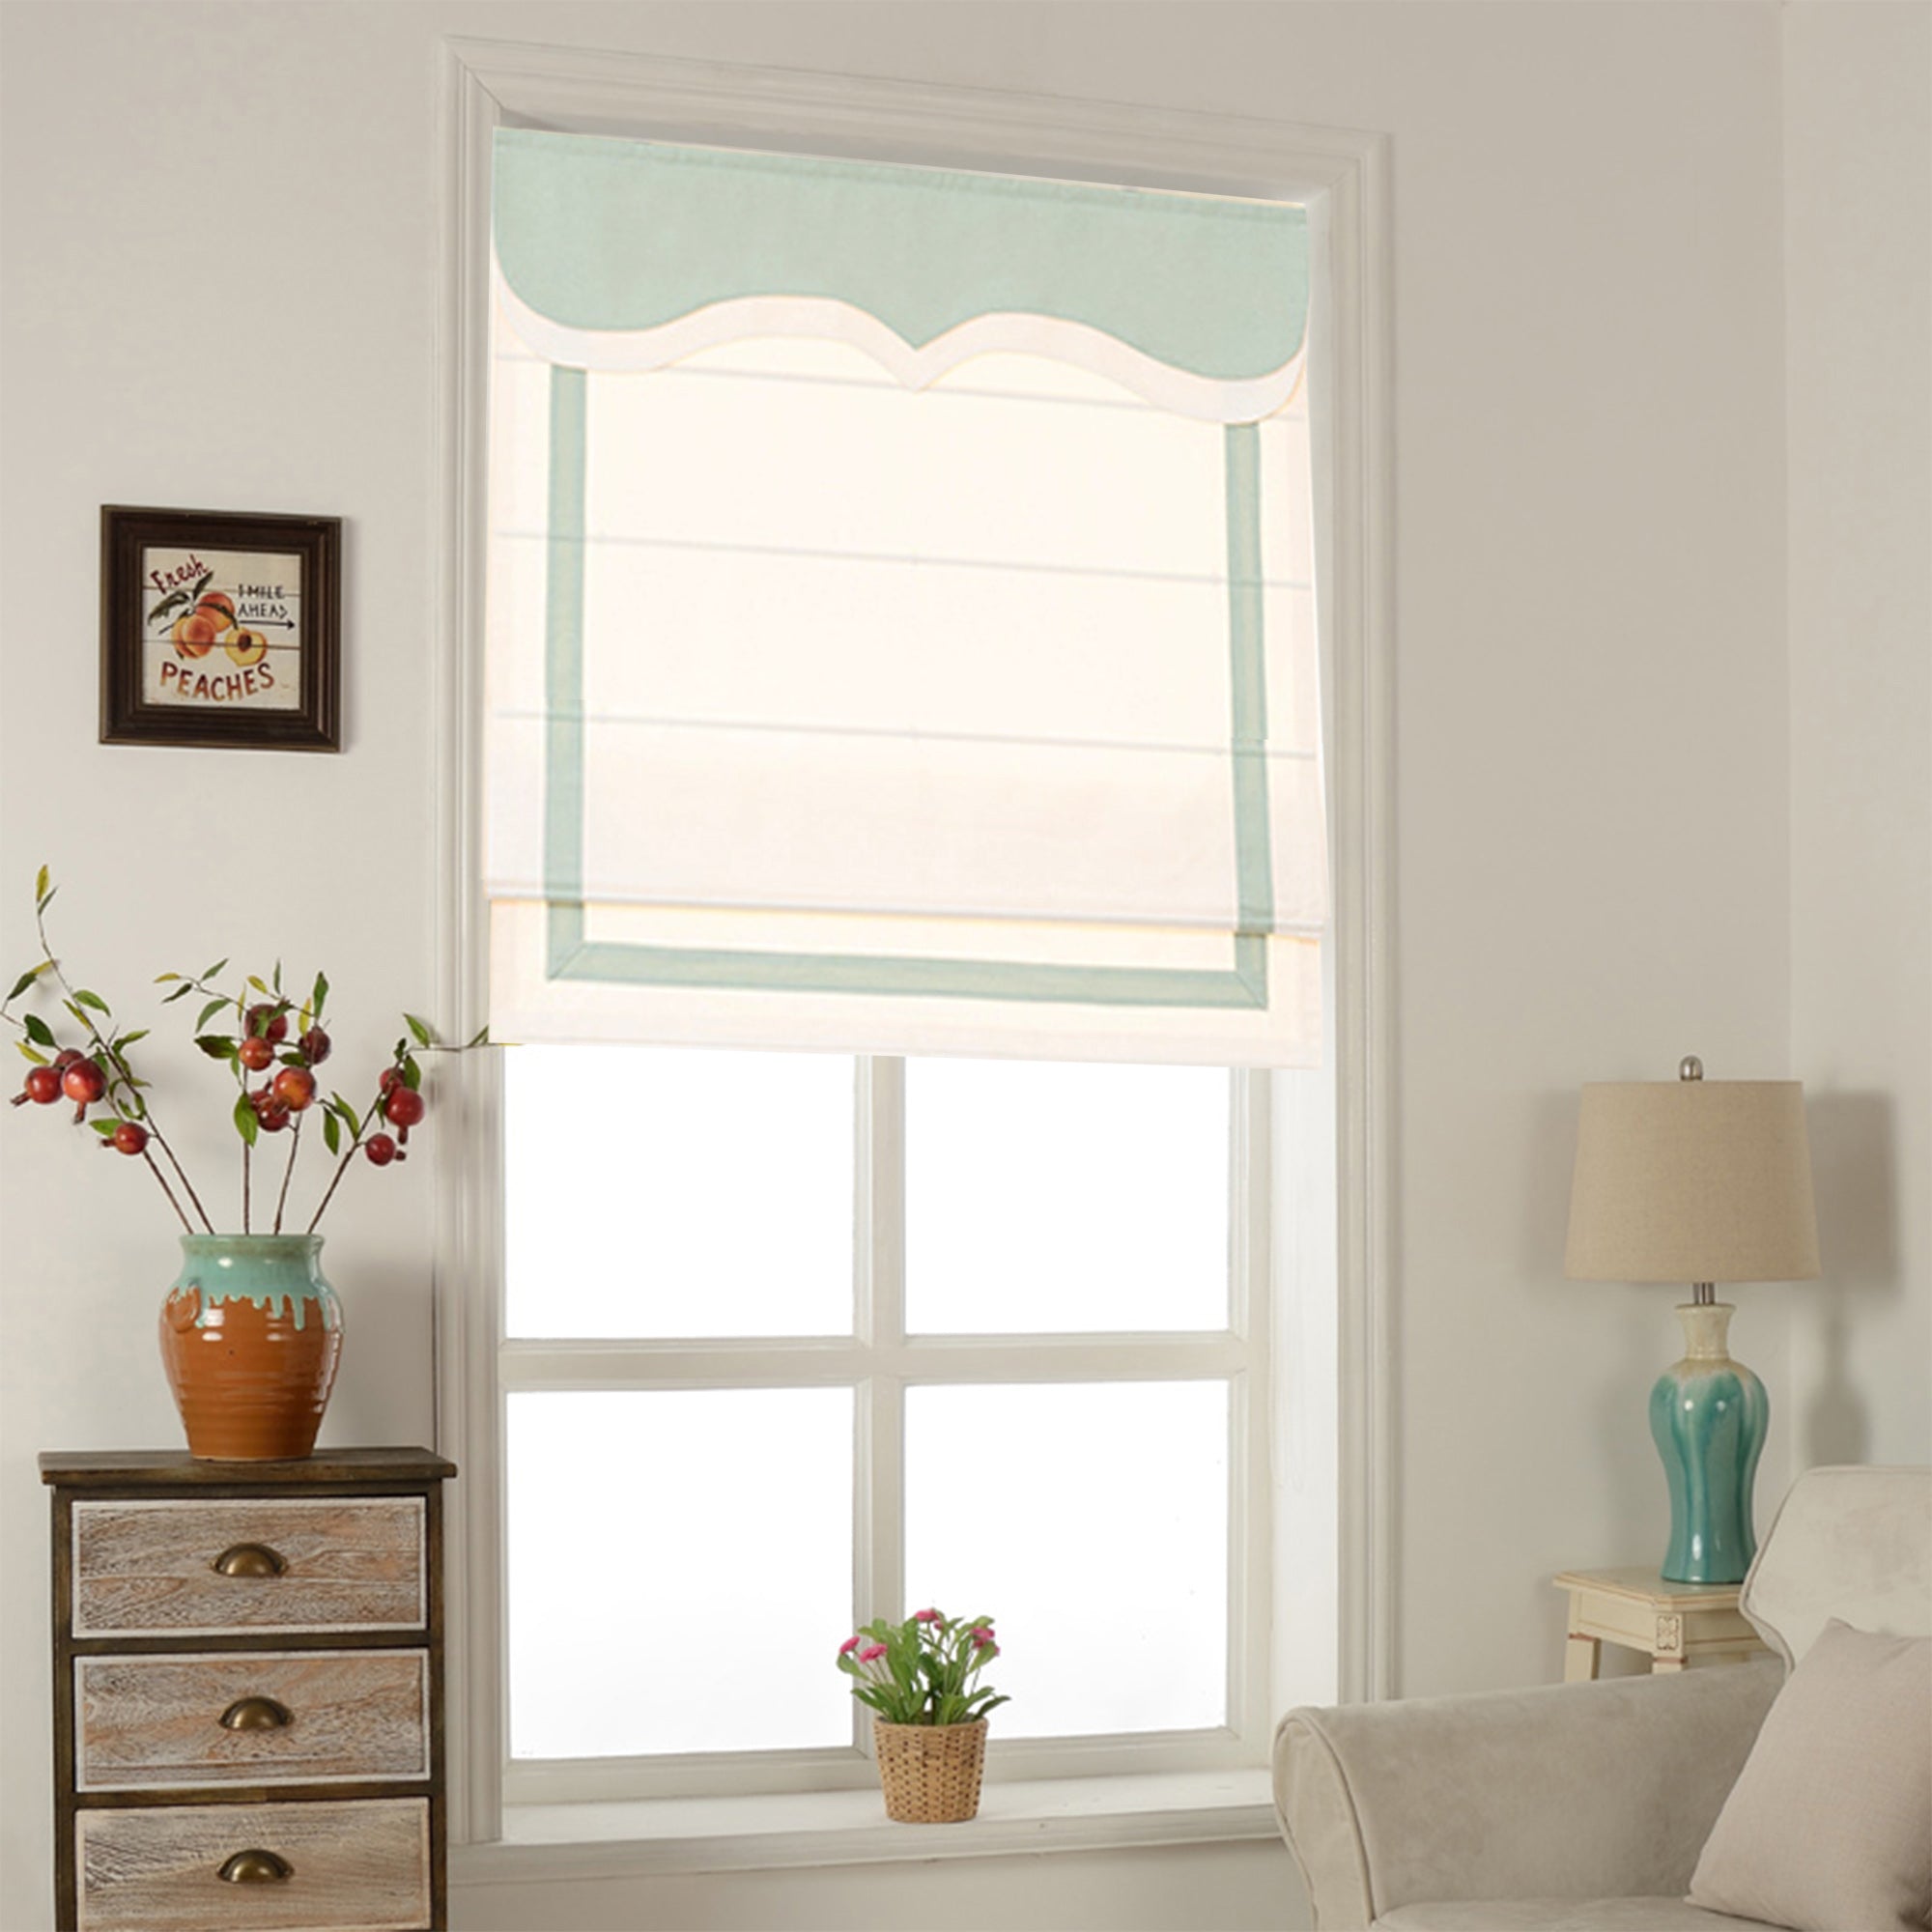 Quick Fix Washable Roman Window Shades Flat Fold with Valance, SG-010 White with Green Trim